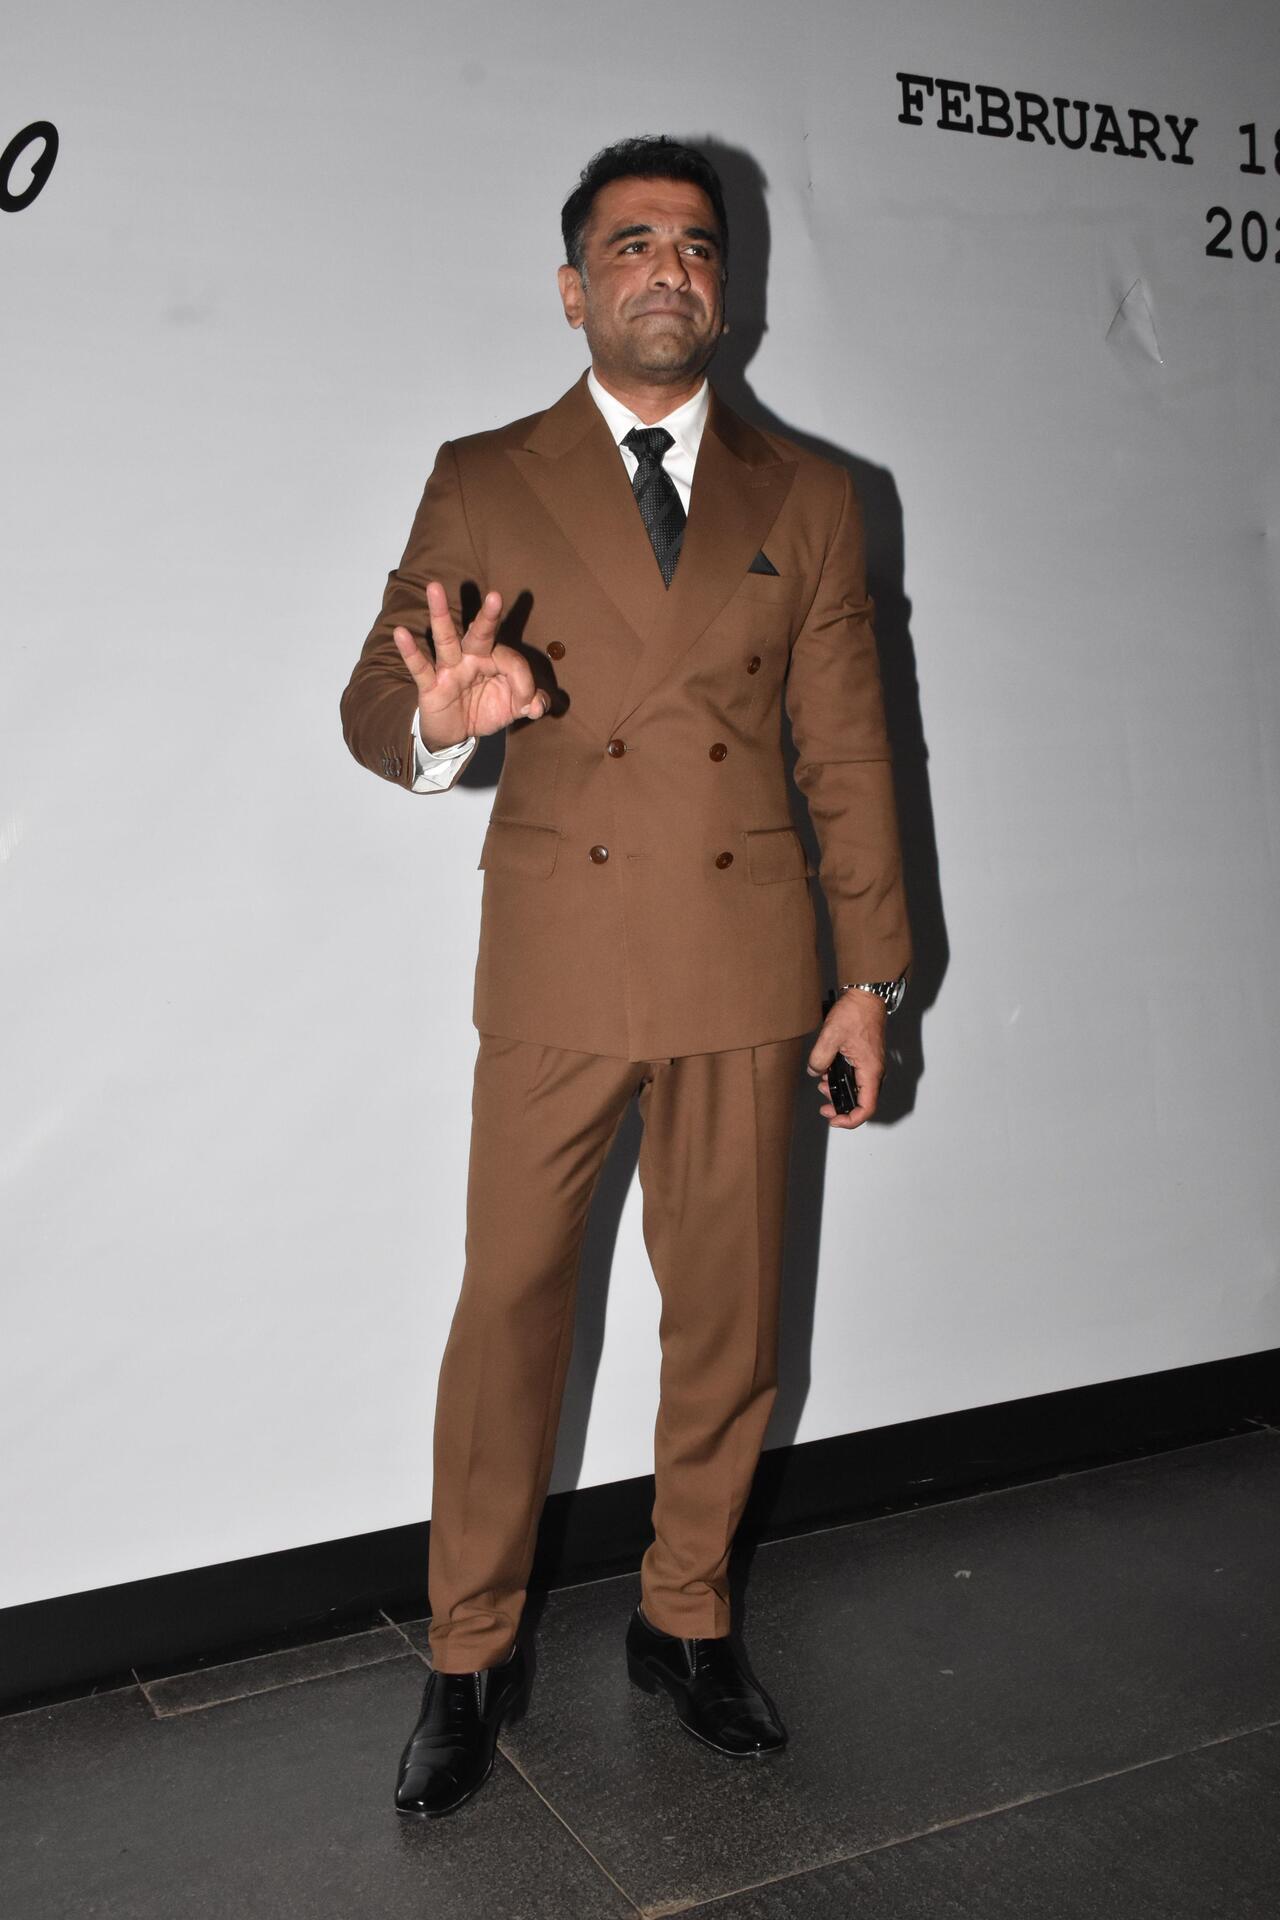 Actor Eijaz Khan looked dapper in a brown suit as he kept his outfit formal for the occasion